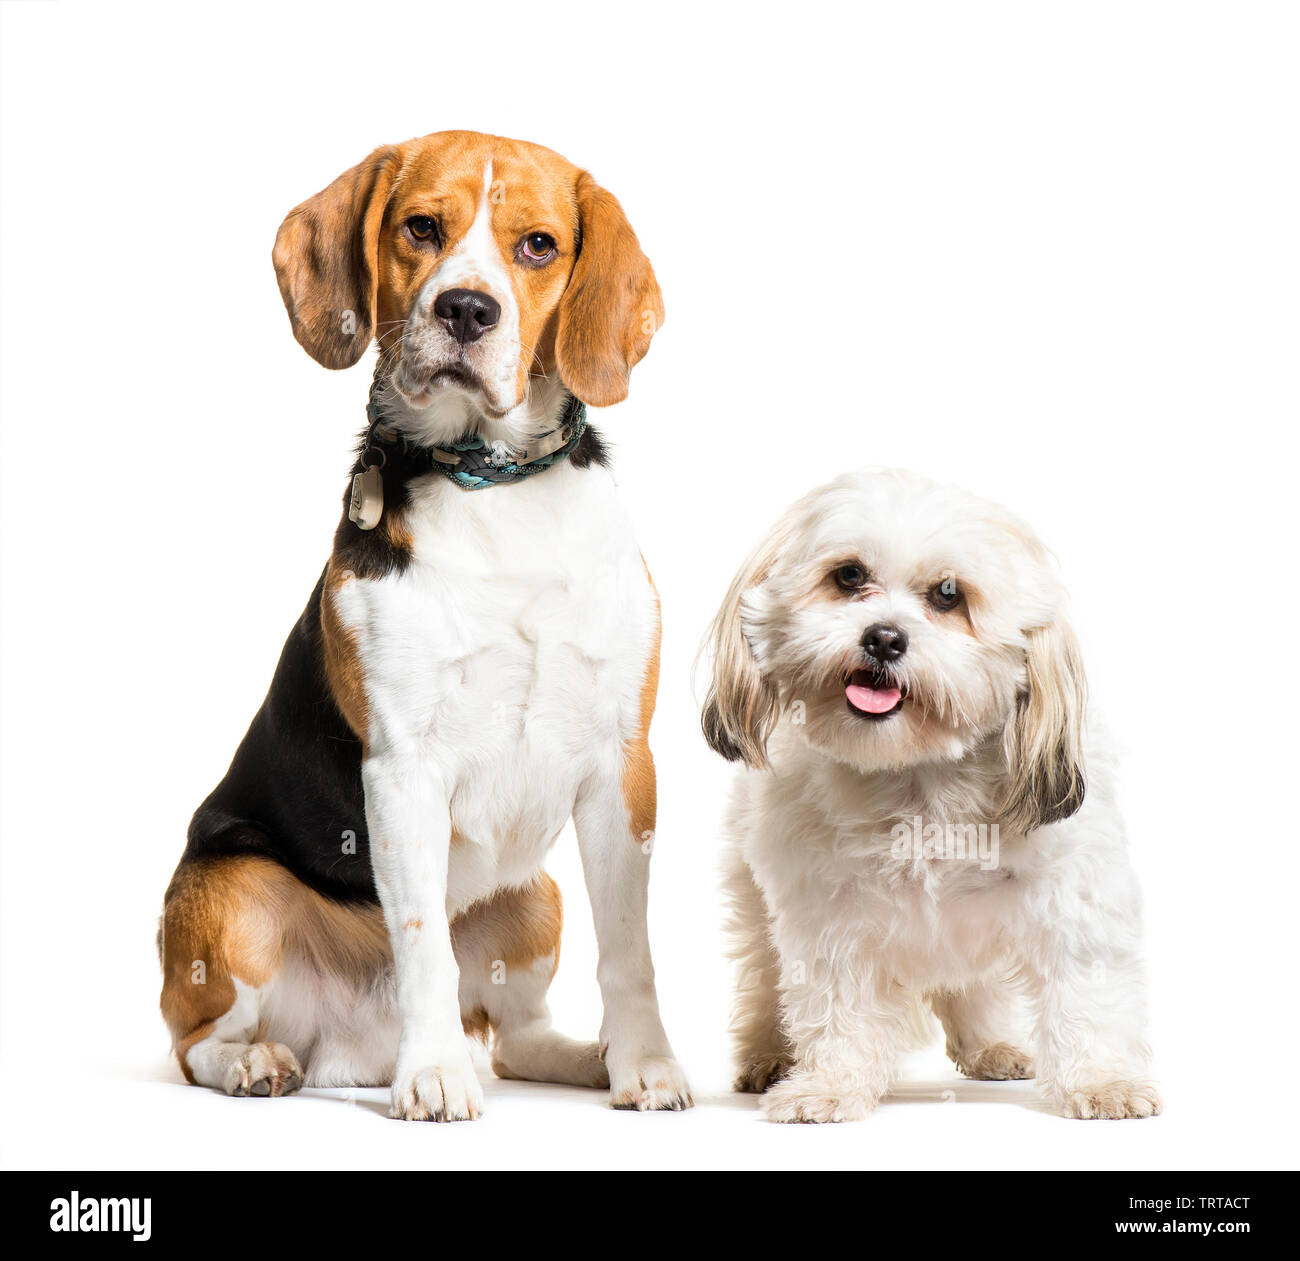 Beagle, Mixed-breed dog sitting in front of white background Stock Photo